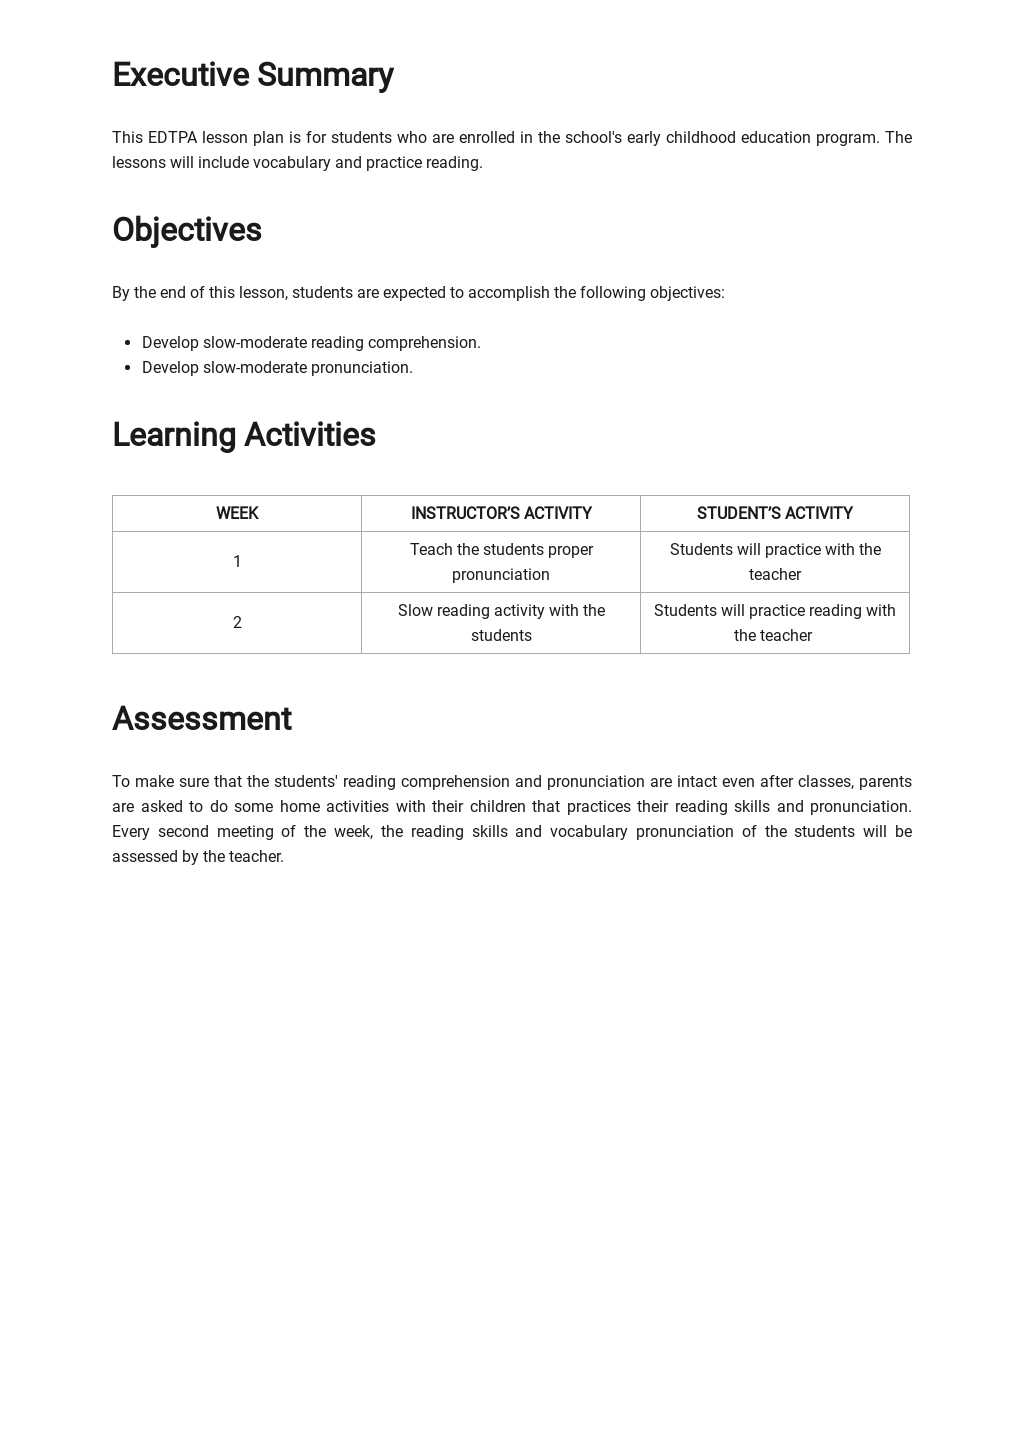 EDTPA Early Childhood Lesson Plan Template 1.jpe